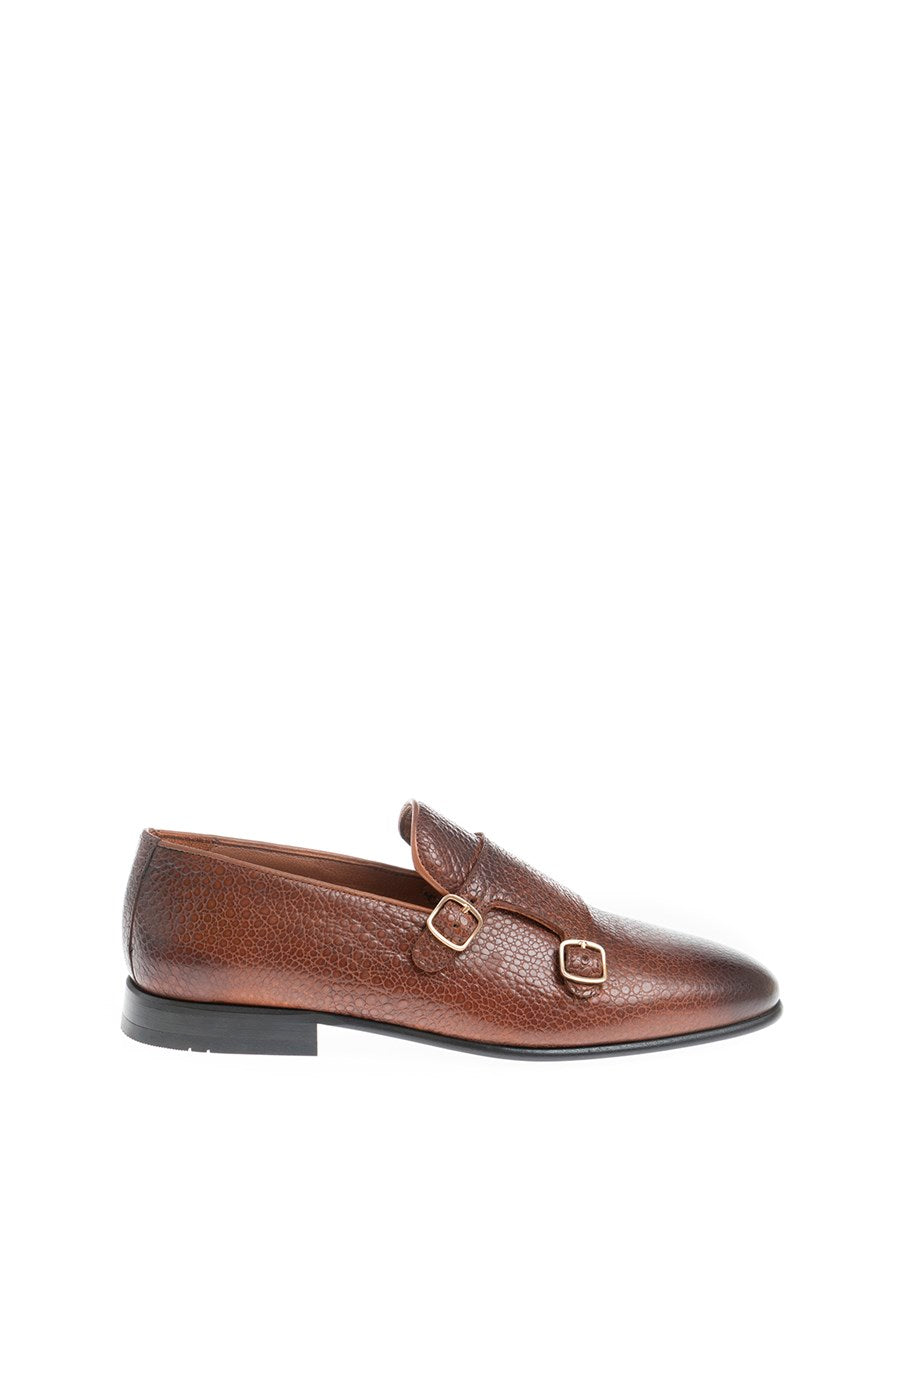 Double Buckle Detail Special Design Loafer - MENSTYLEWITH